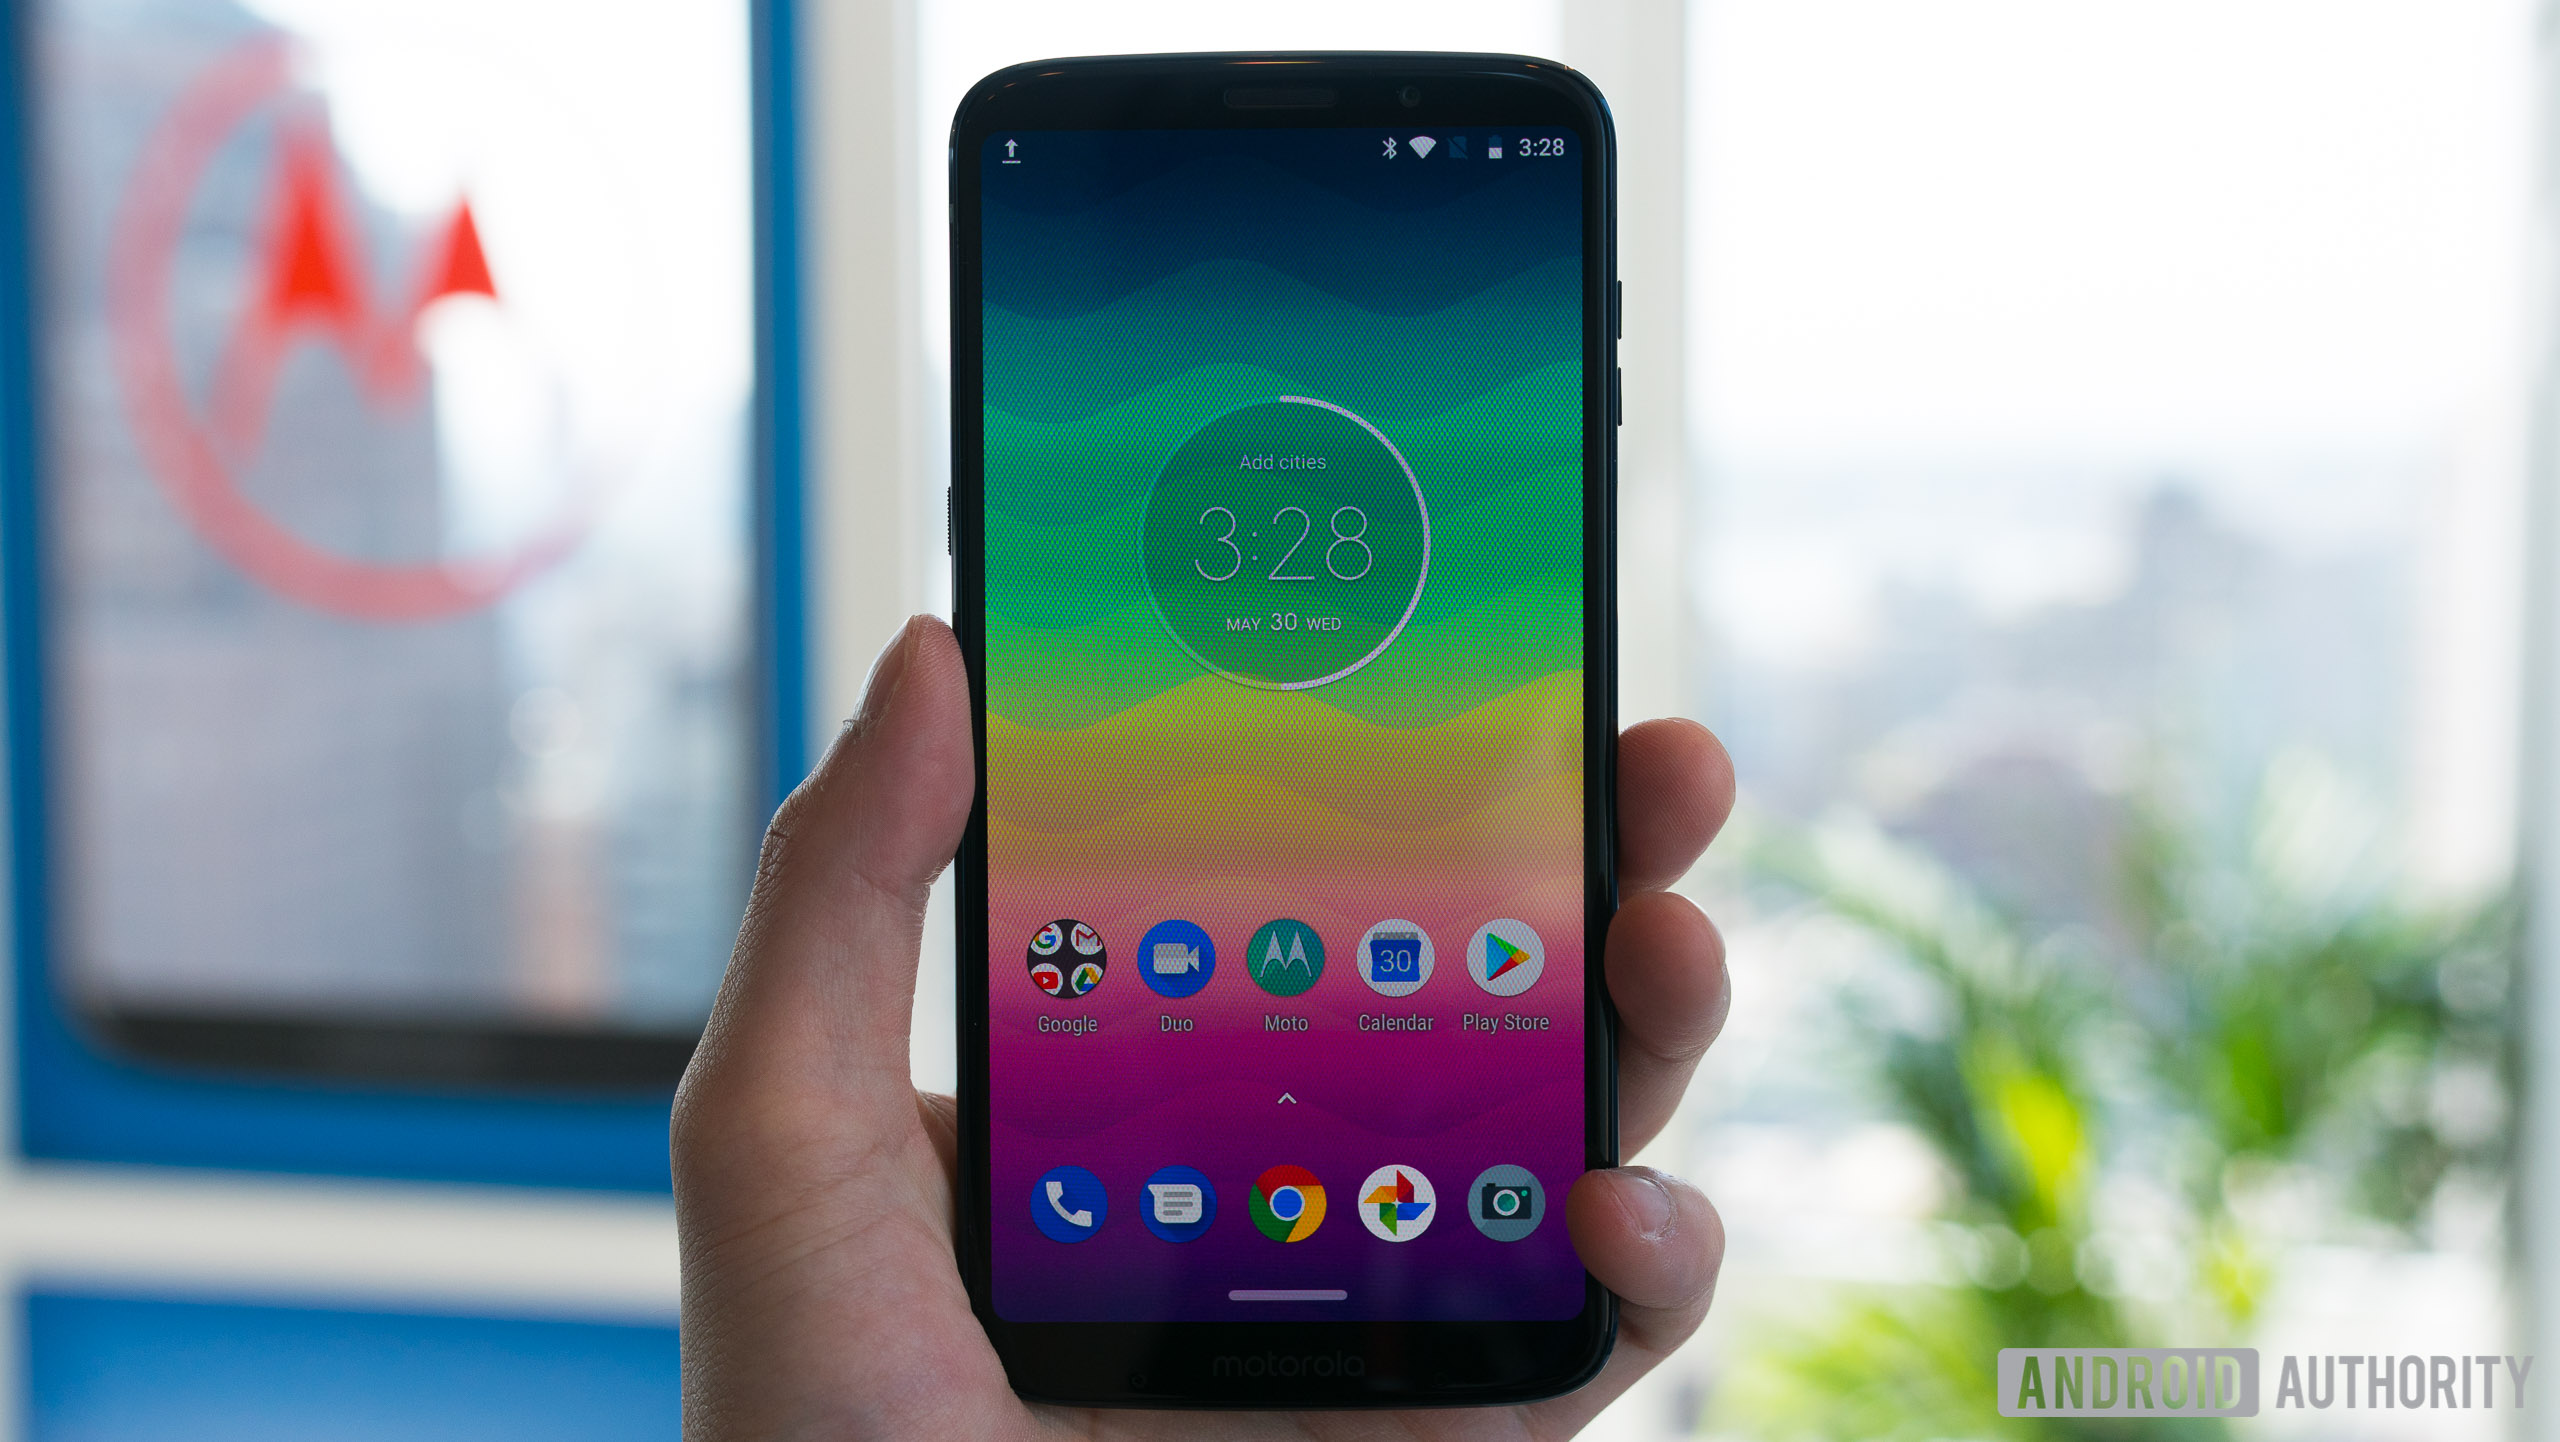 frontal shot of moto z3 play showing the homescreen and navigation interface